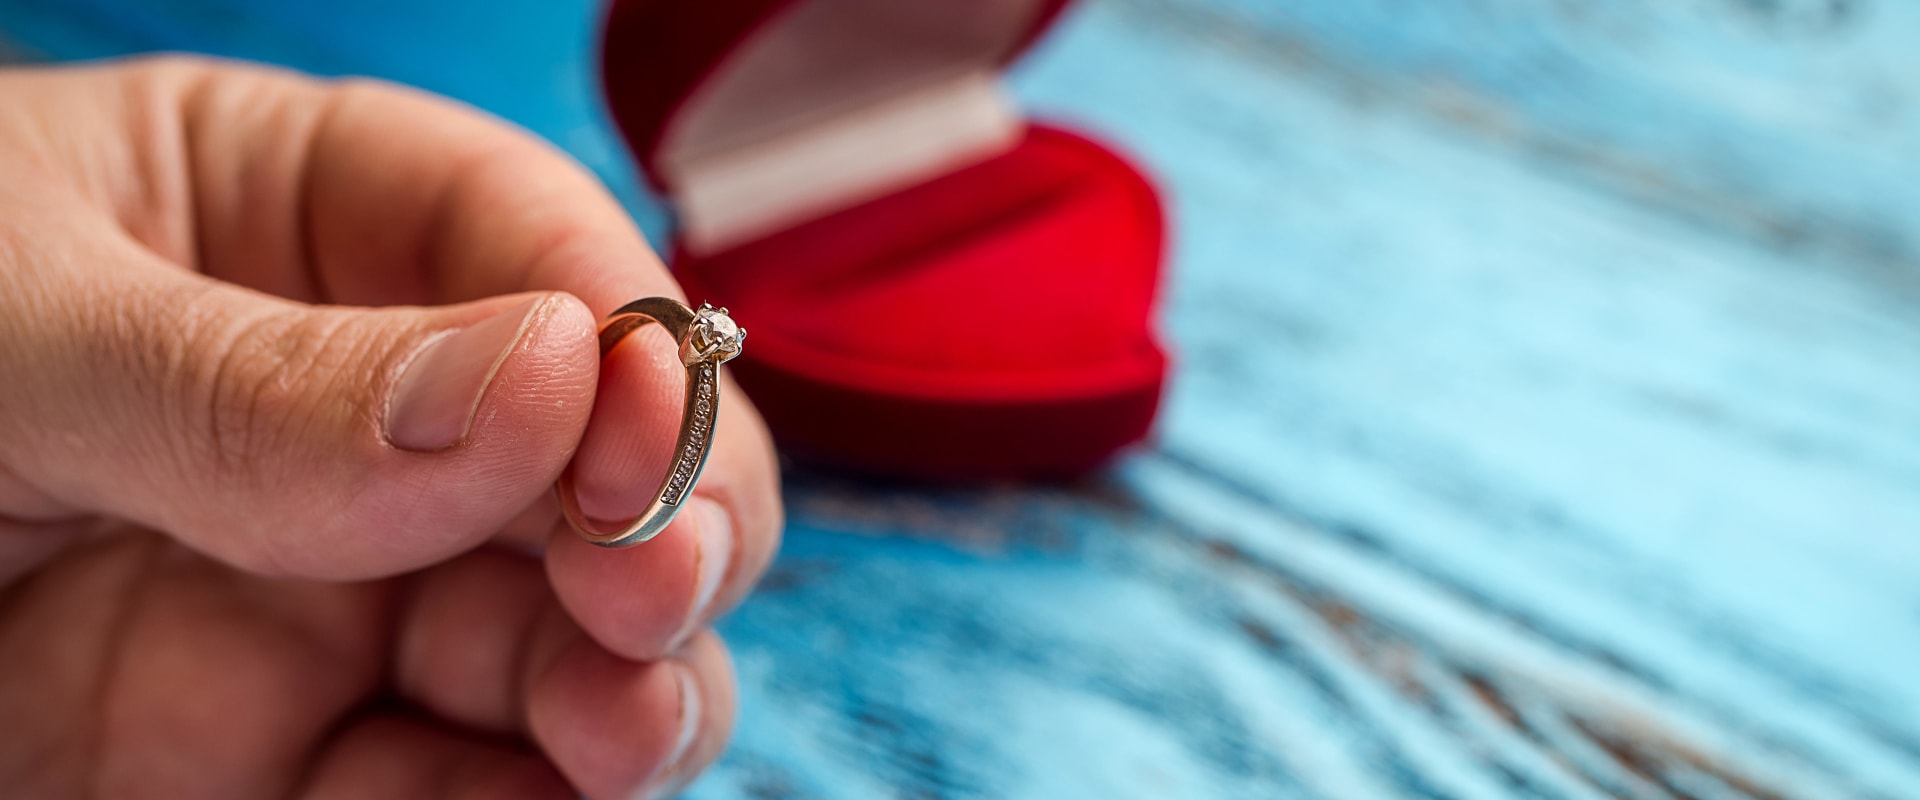 Who legally owns an engagement ring after breakup?